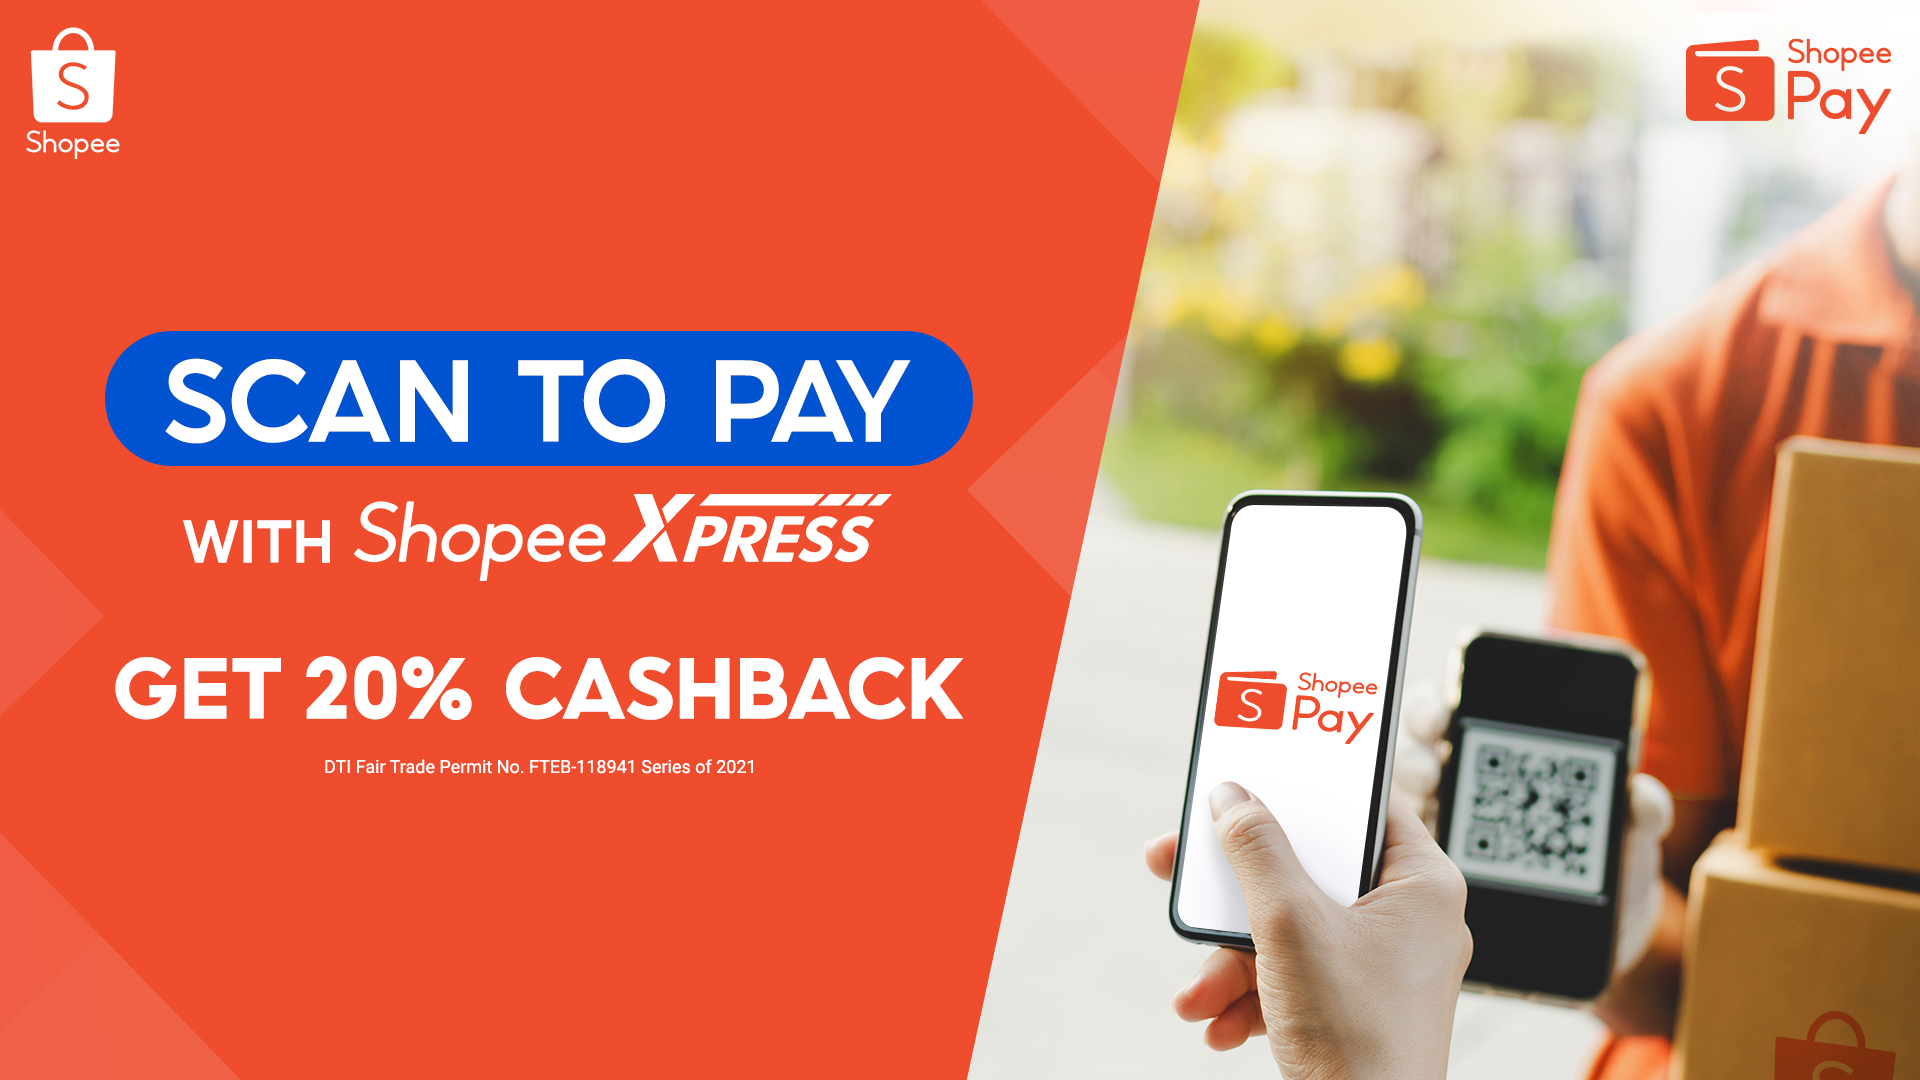 No Cash? No Problem! Shopee Lets You Pay for Your COD Purchases via ShopeePay